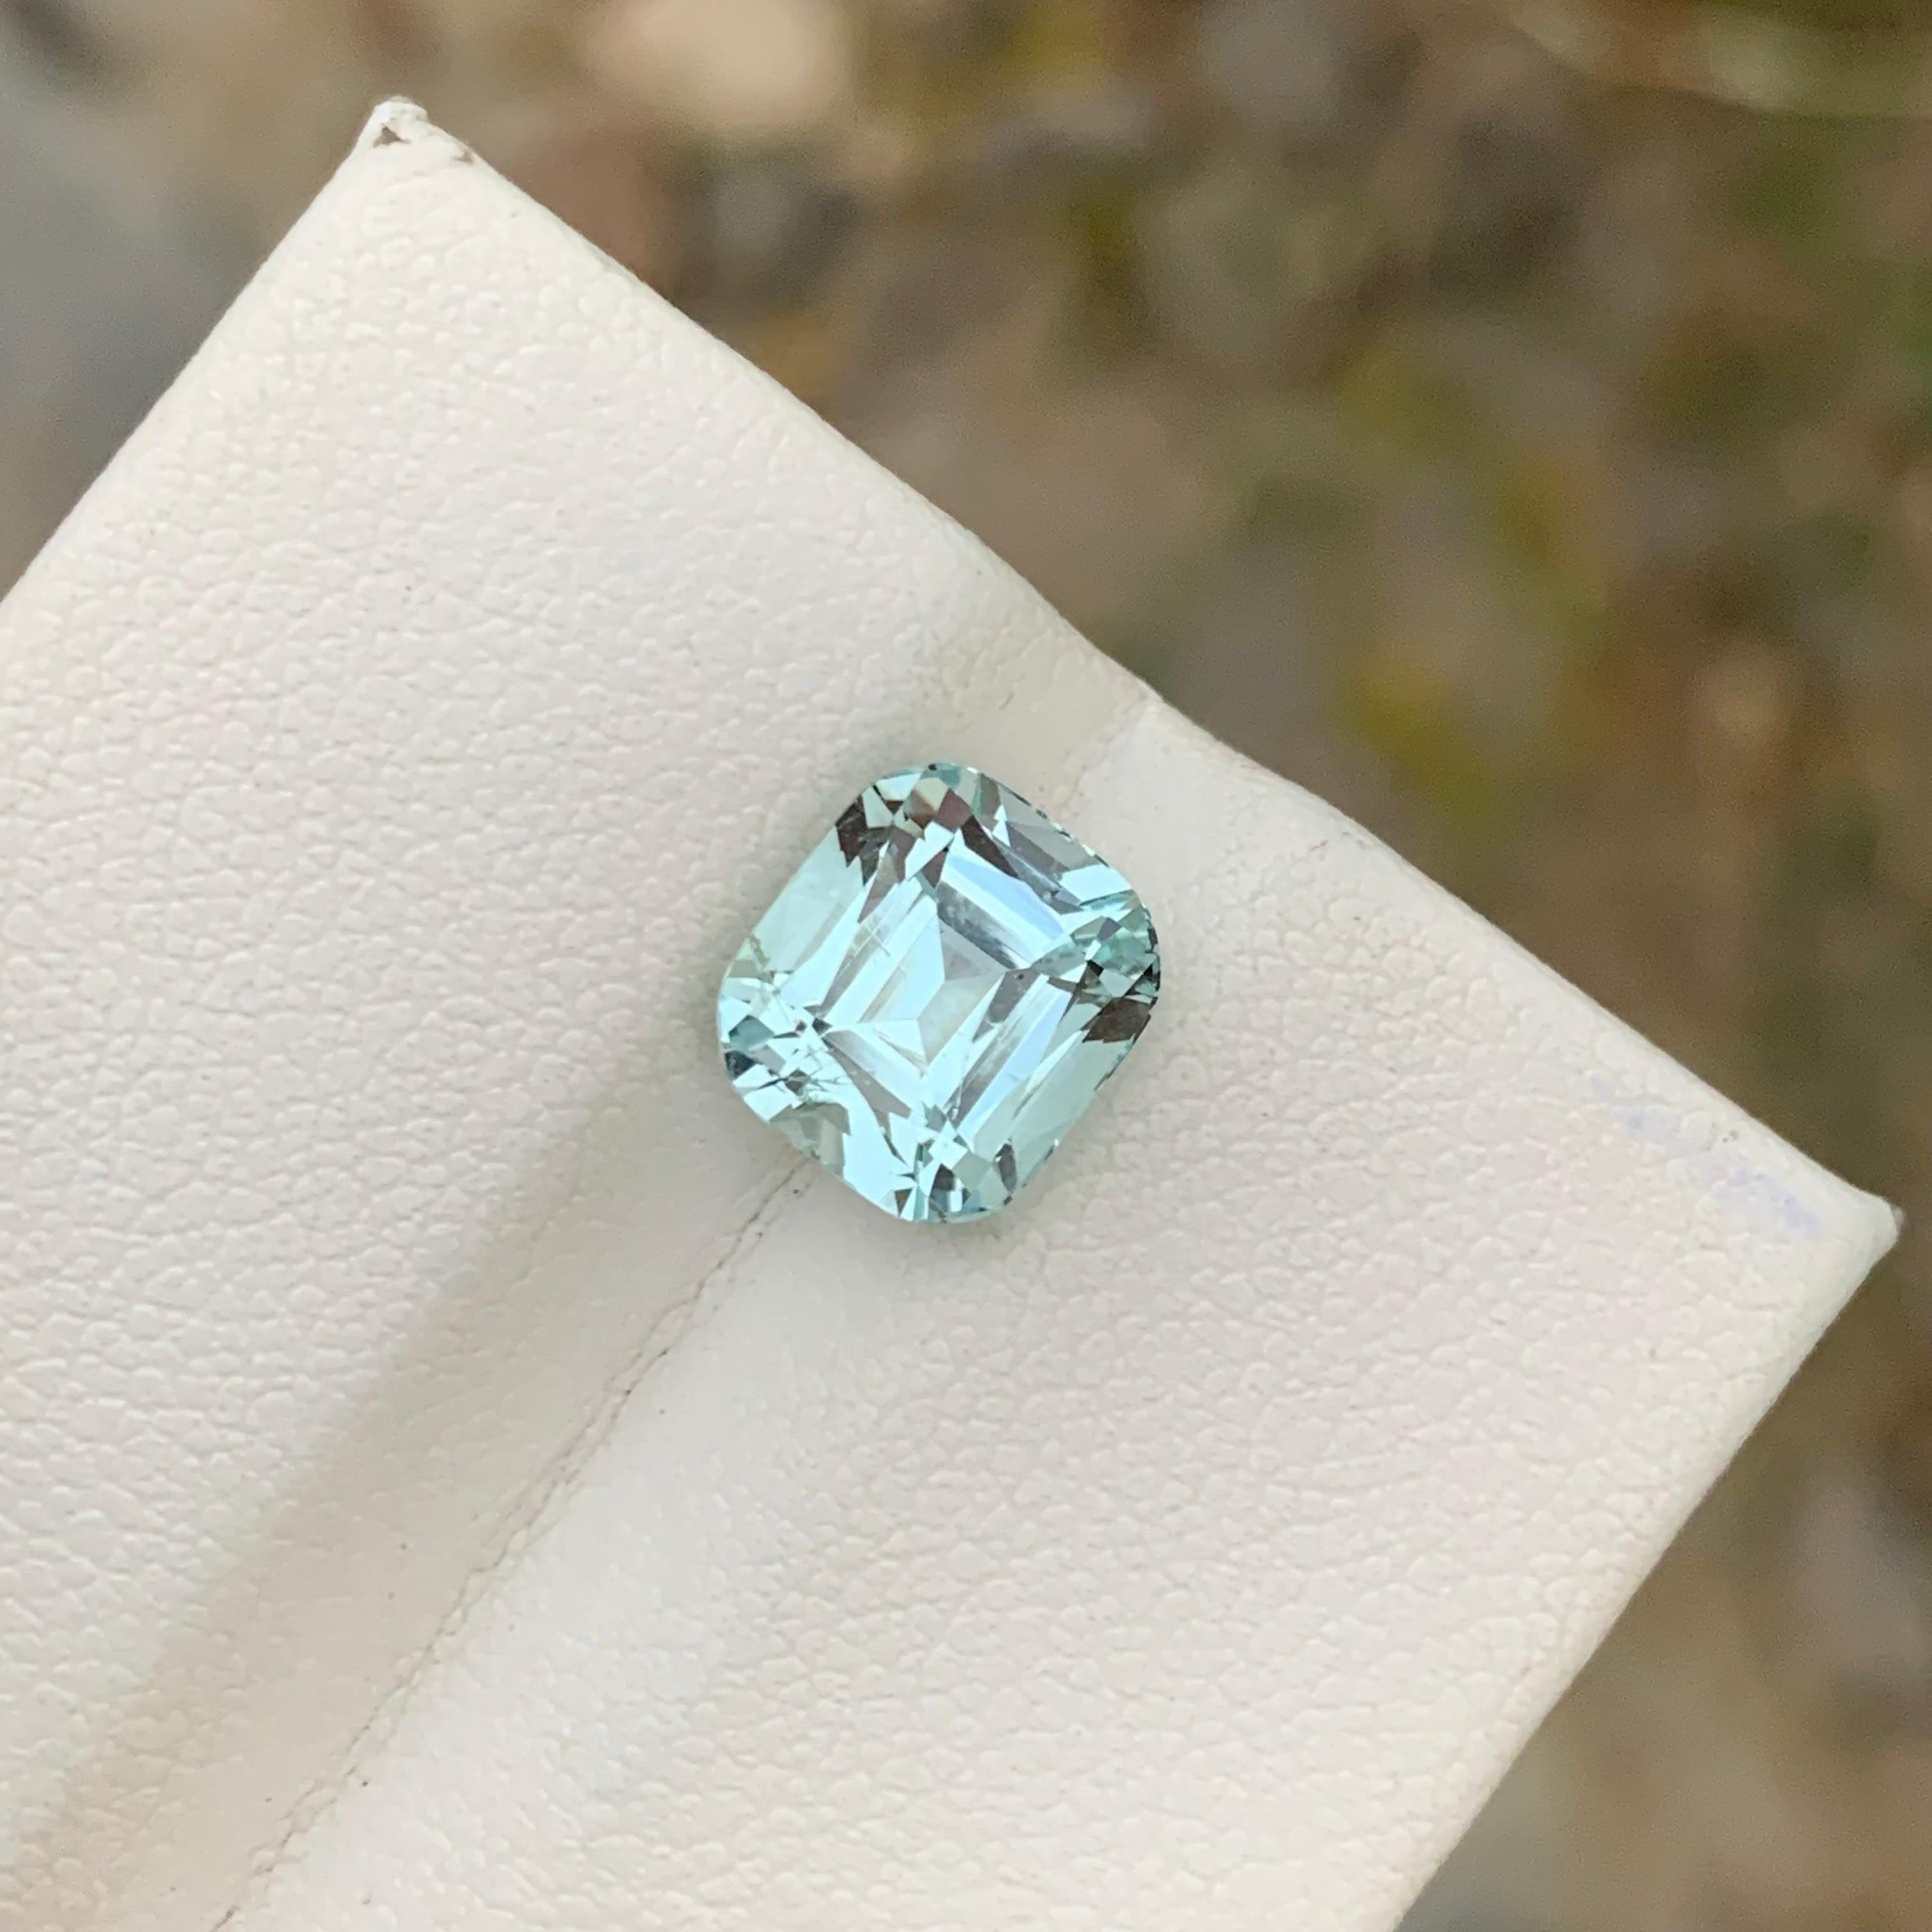 3.55 Carats Natural Loose Aquamarine Ring Gem From Shigar Valley Mine For Sale 3